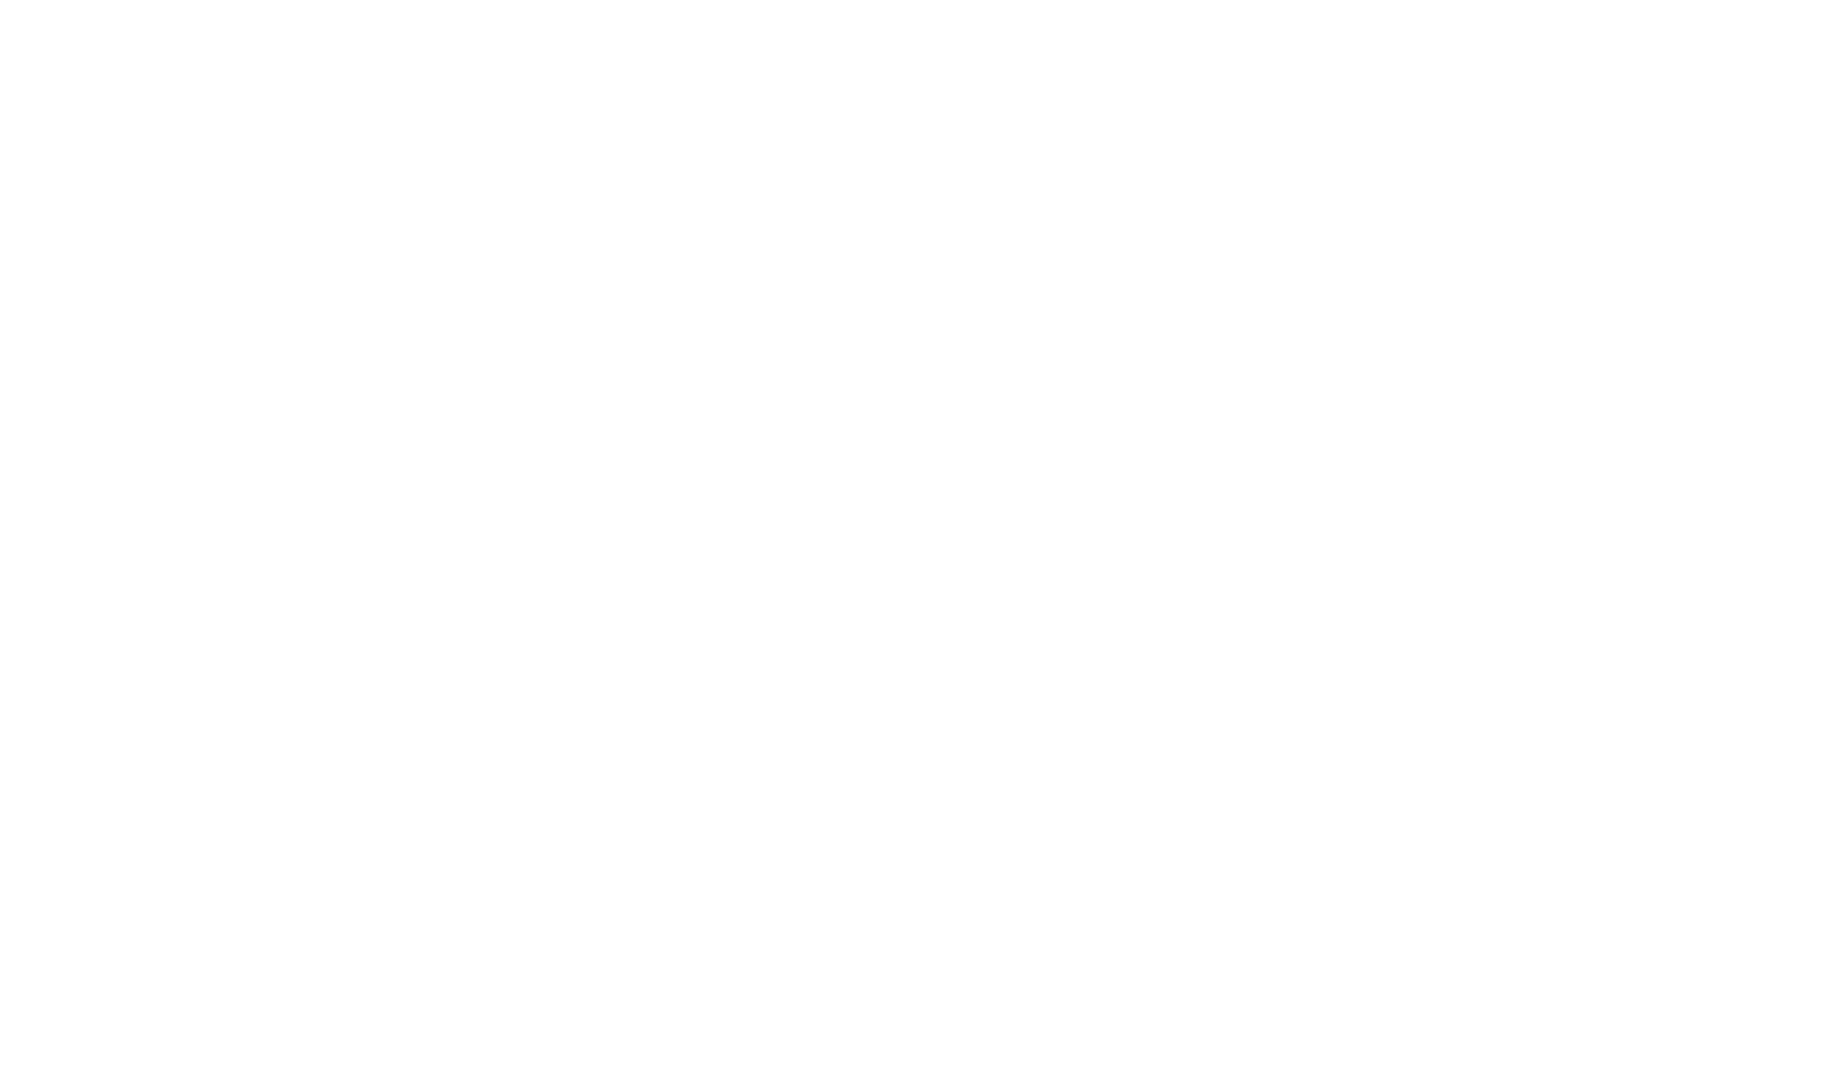 A green and white logo for hammons foot & ankle.